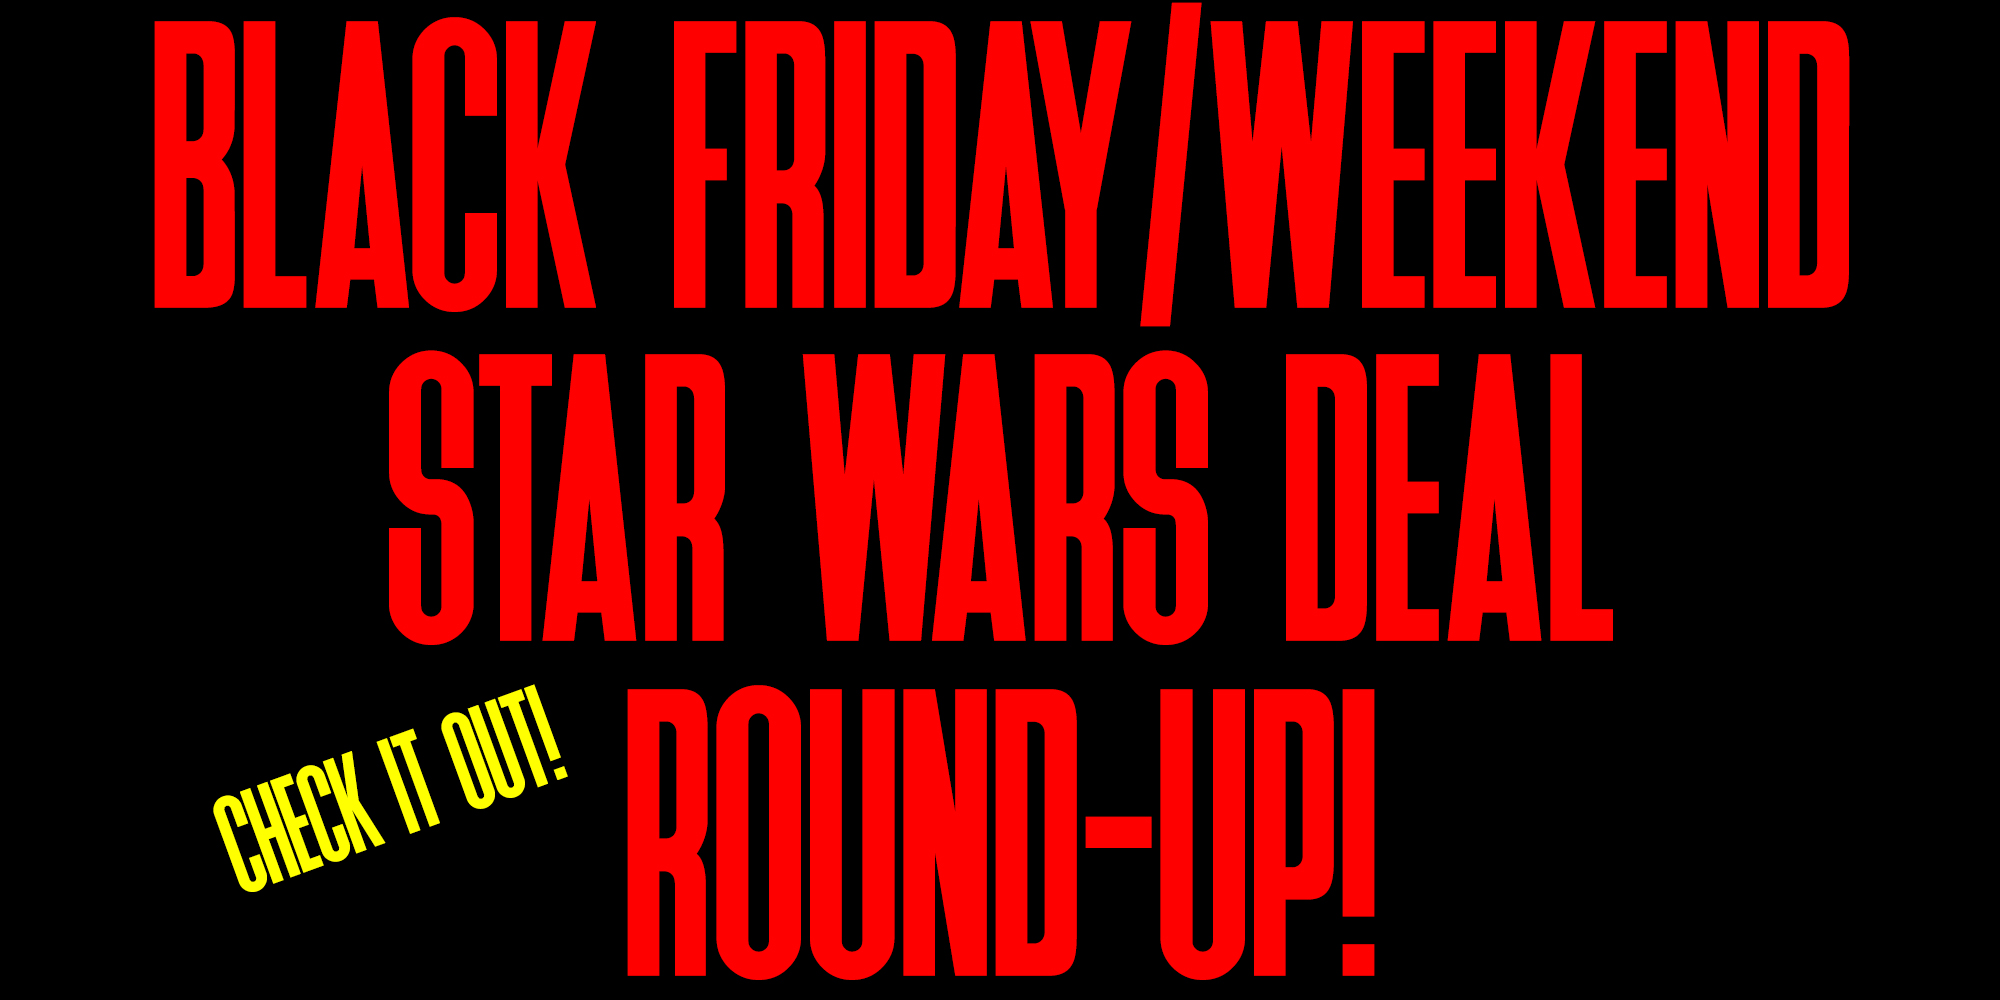 Black Friday 2021 Star Wars Deal Round-Up - Check It Out!